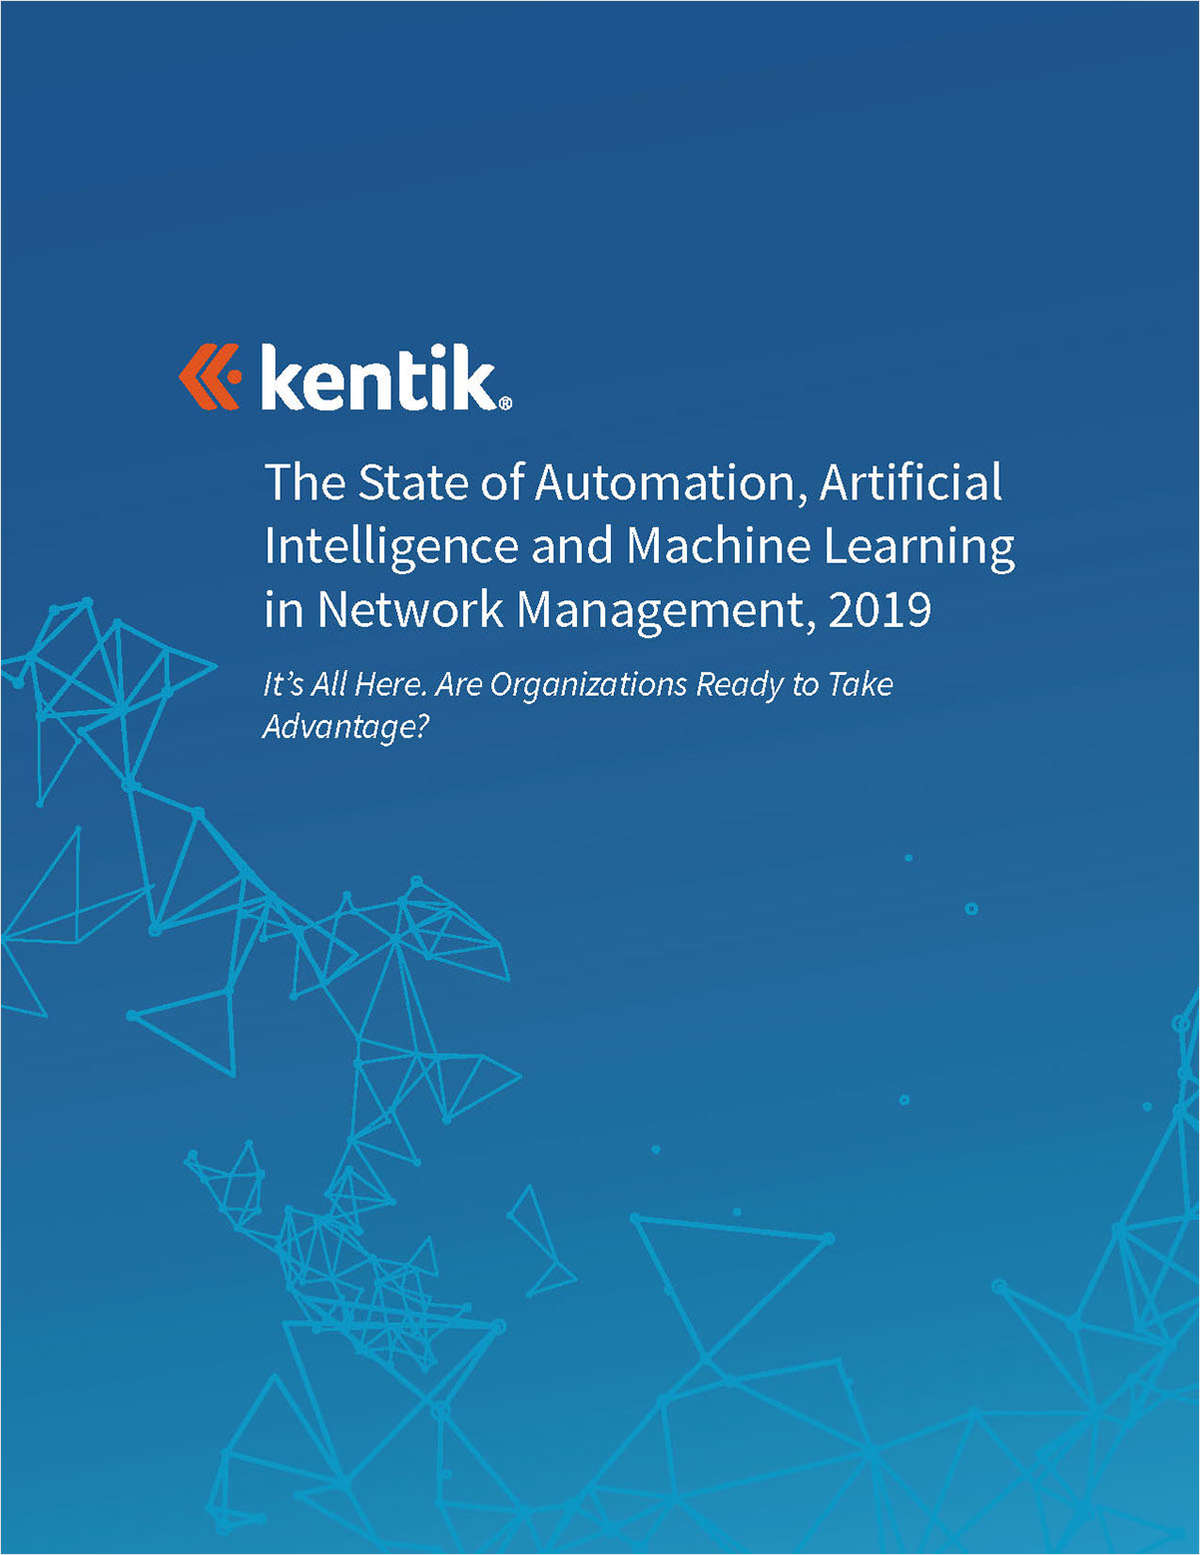 The State of Automation, Artificial Intelligence and Machine Learning in Network Management